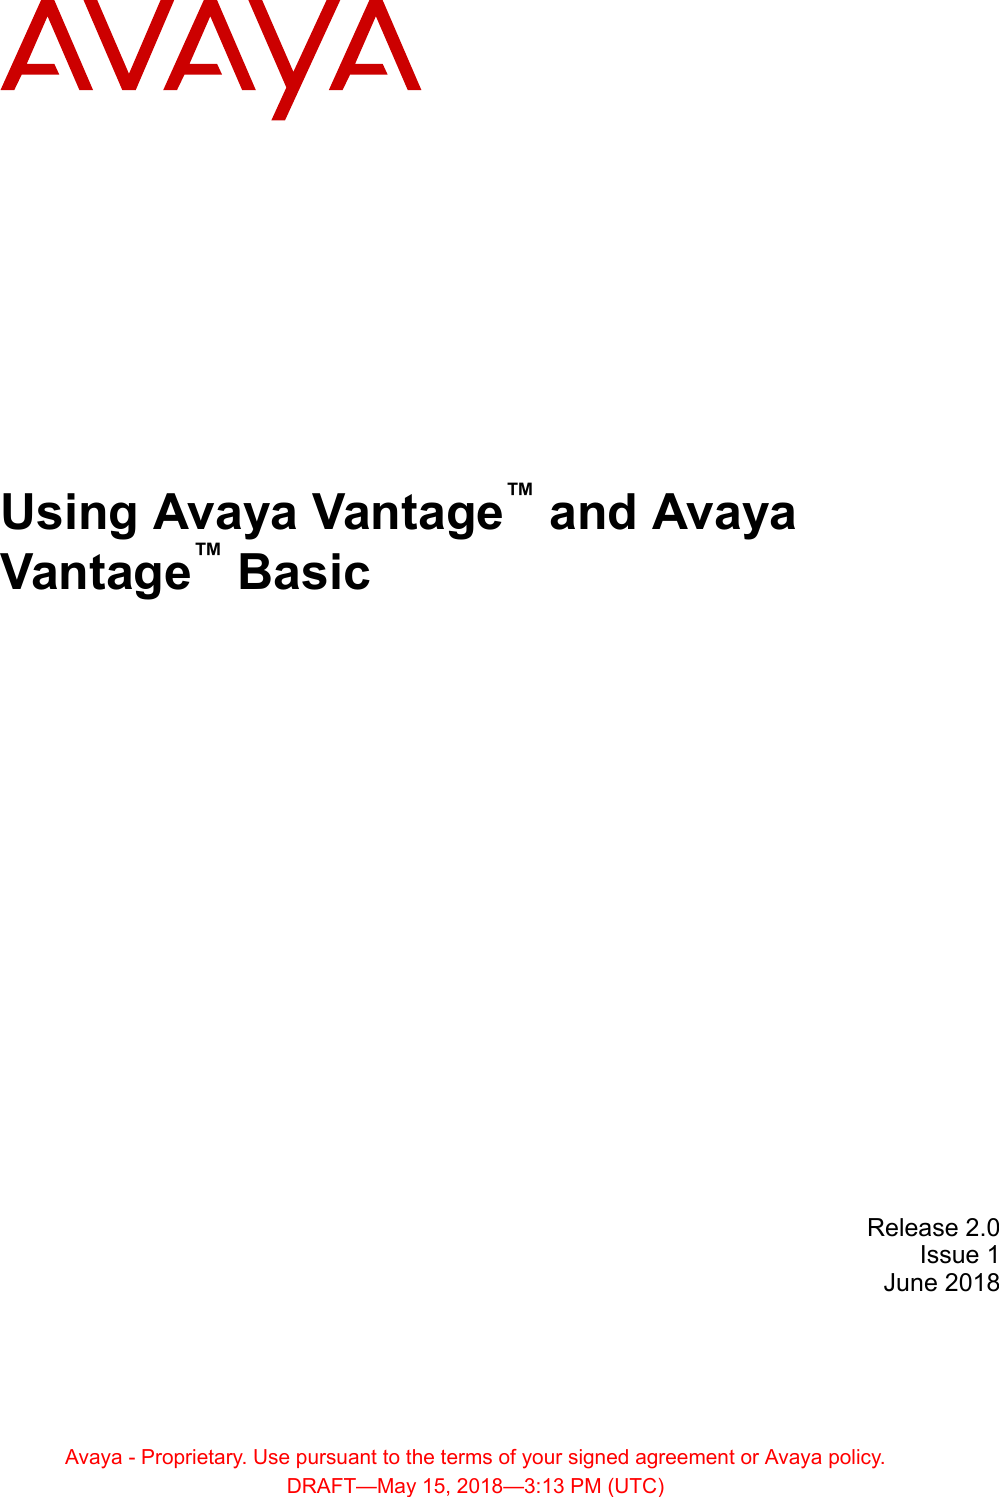 Using Avaya Vantage™ and AvayaVantage™ BasicRelease 2.0Issue 1June 2018Avaya - Proprietary. Use pursuant to the terms of your signed agreement or Avaya policy.DRAFT—May 15, 2018—3:13 PM (UTC)